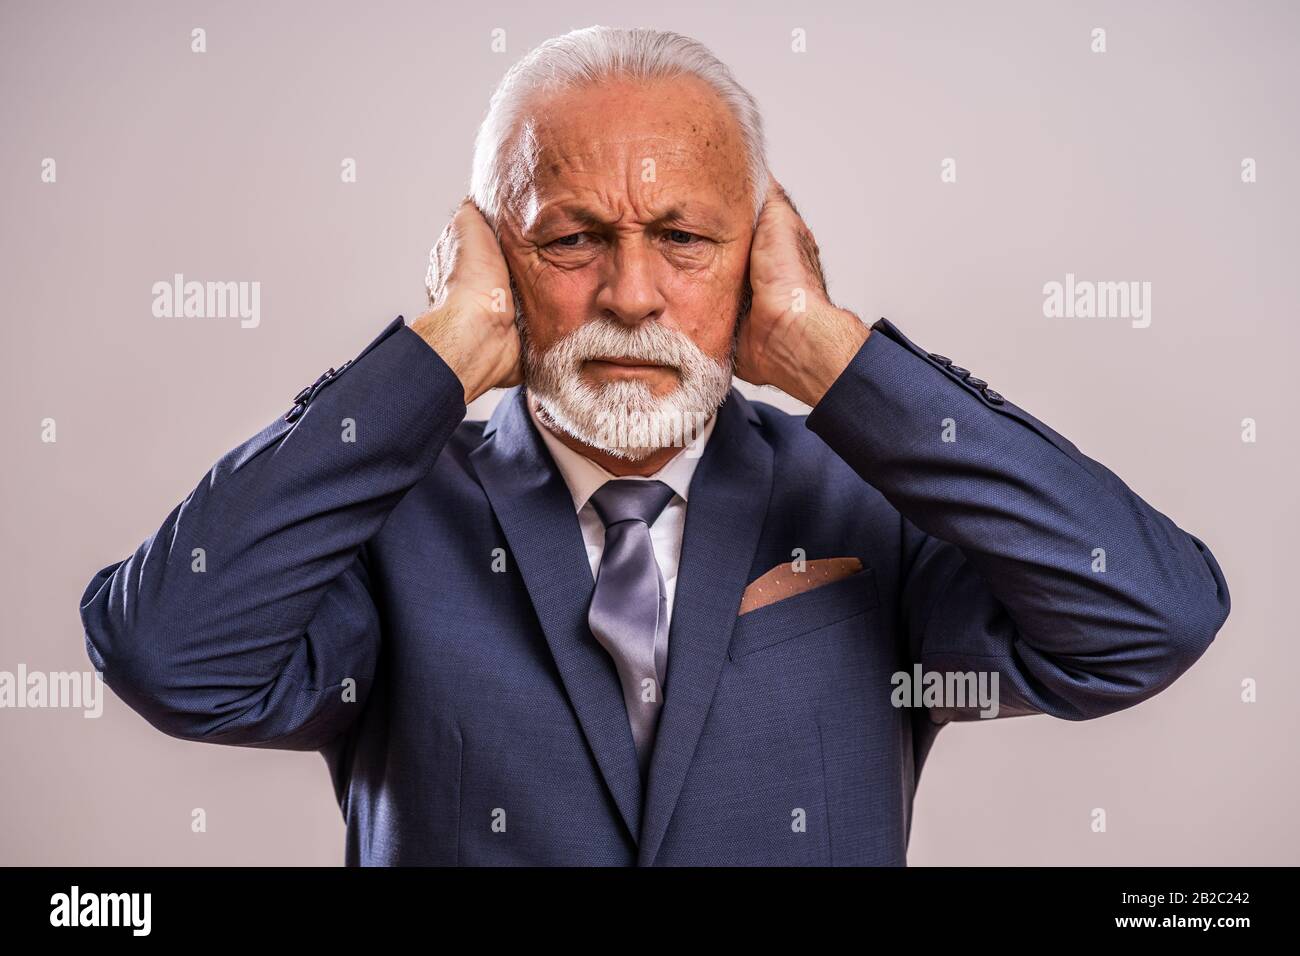 Portrait of senior businessman who is tired and frustrated. Stock Photo